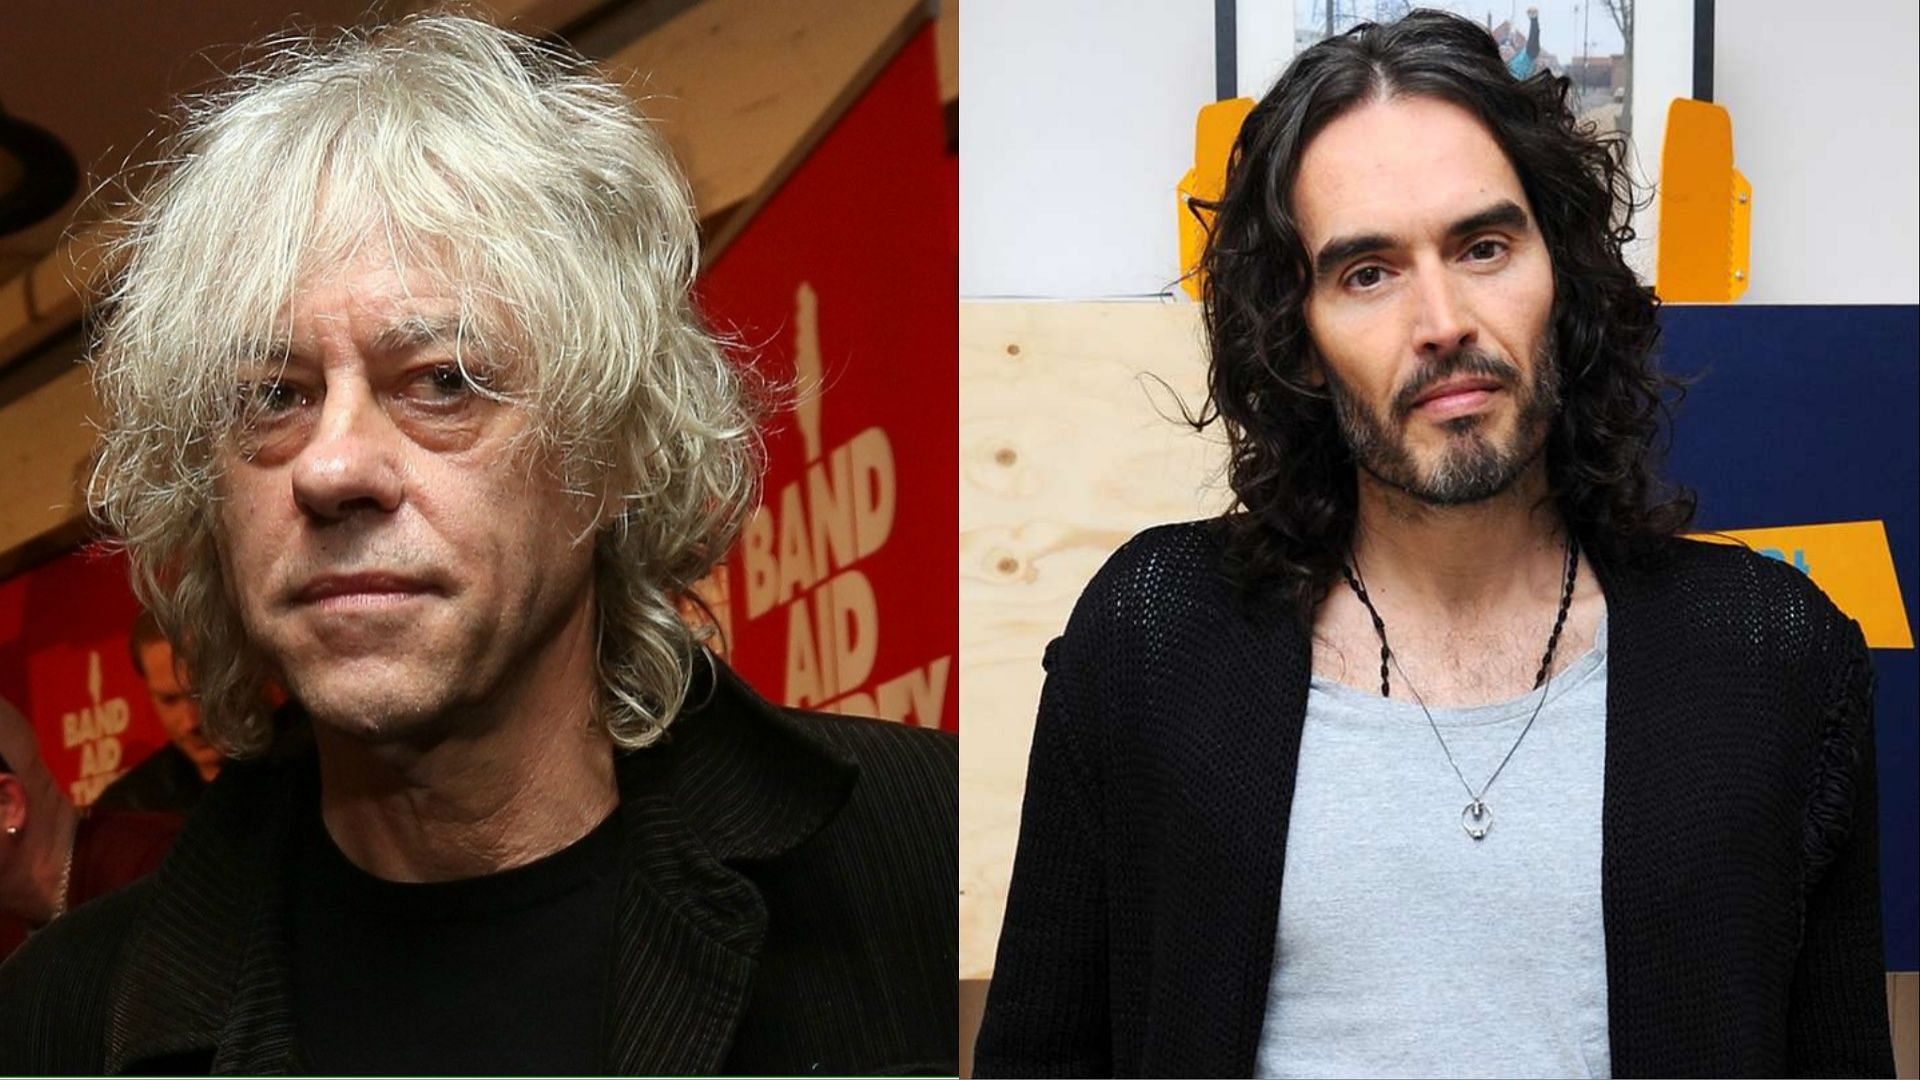 Bob Geldof and Russell Brand. (Photos via Getty Images)